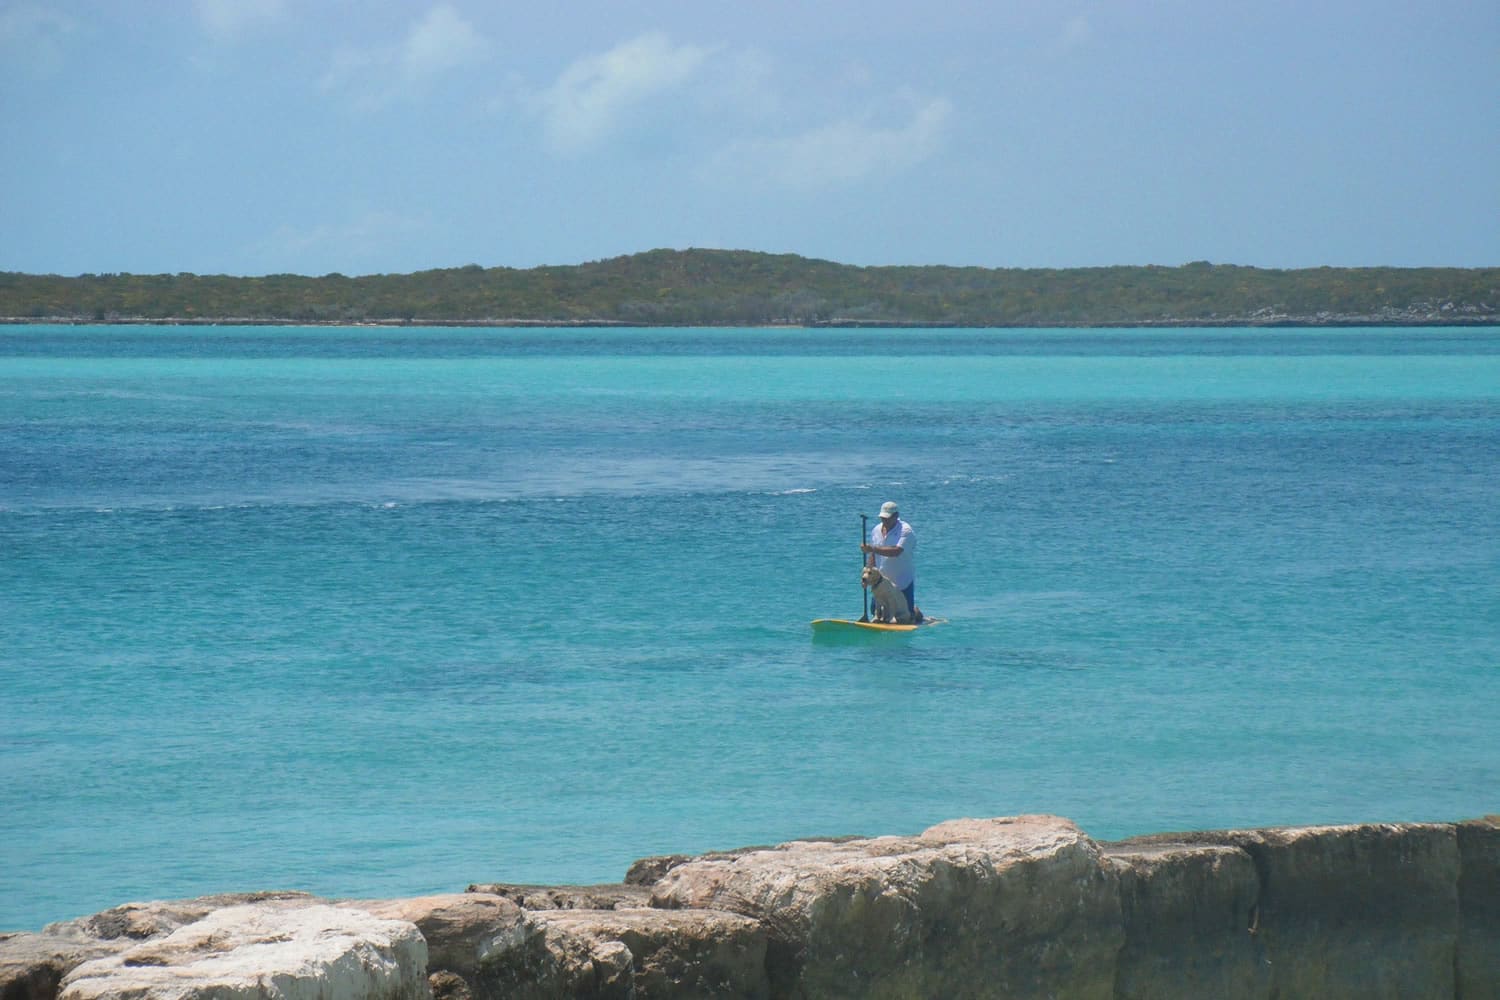 A man is riding a paddle board in the crystal clear waters of Staniel Cay.